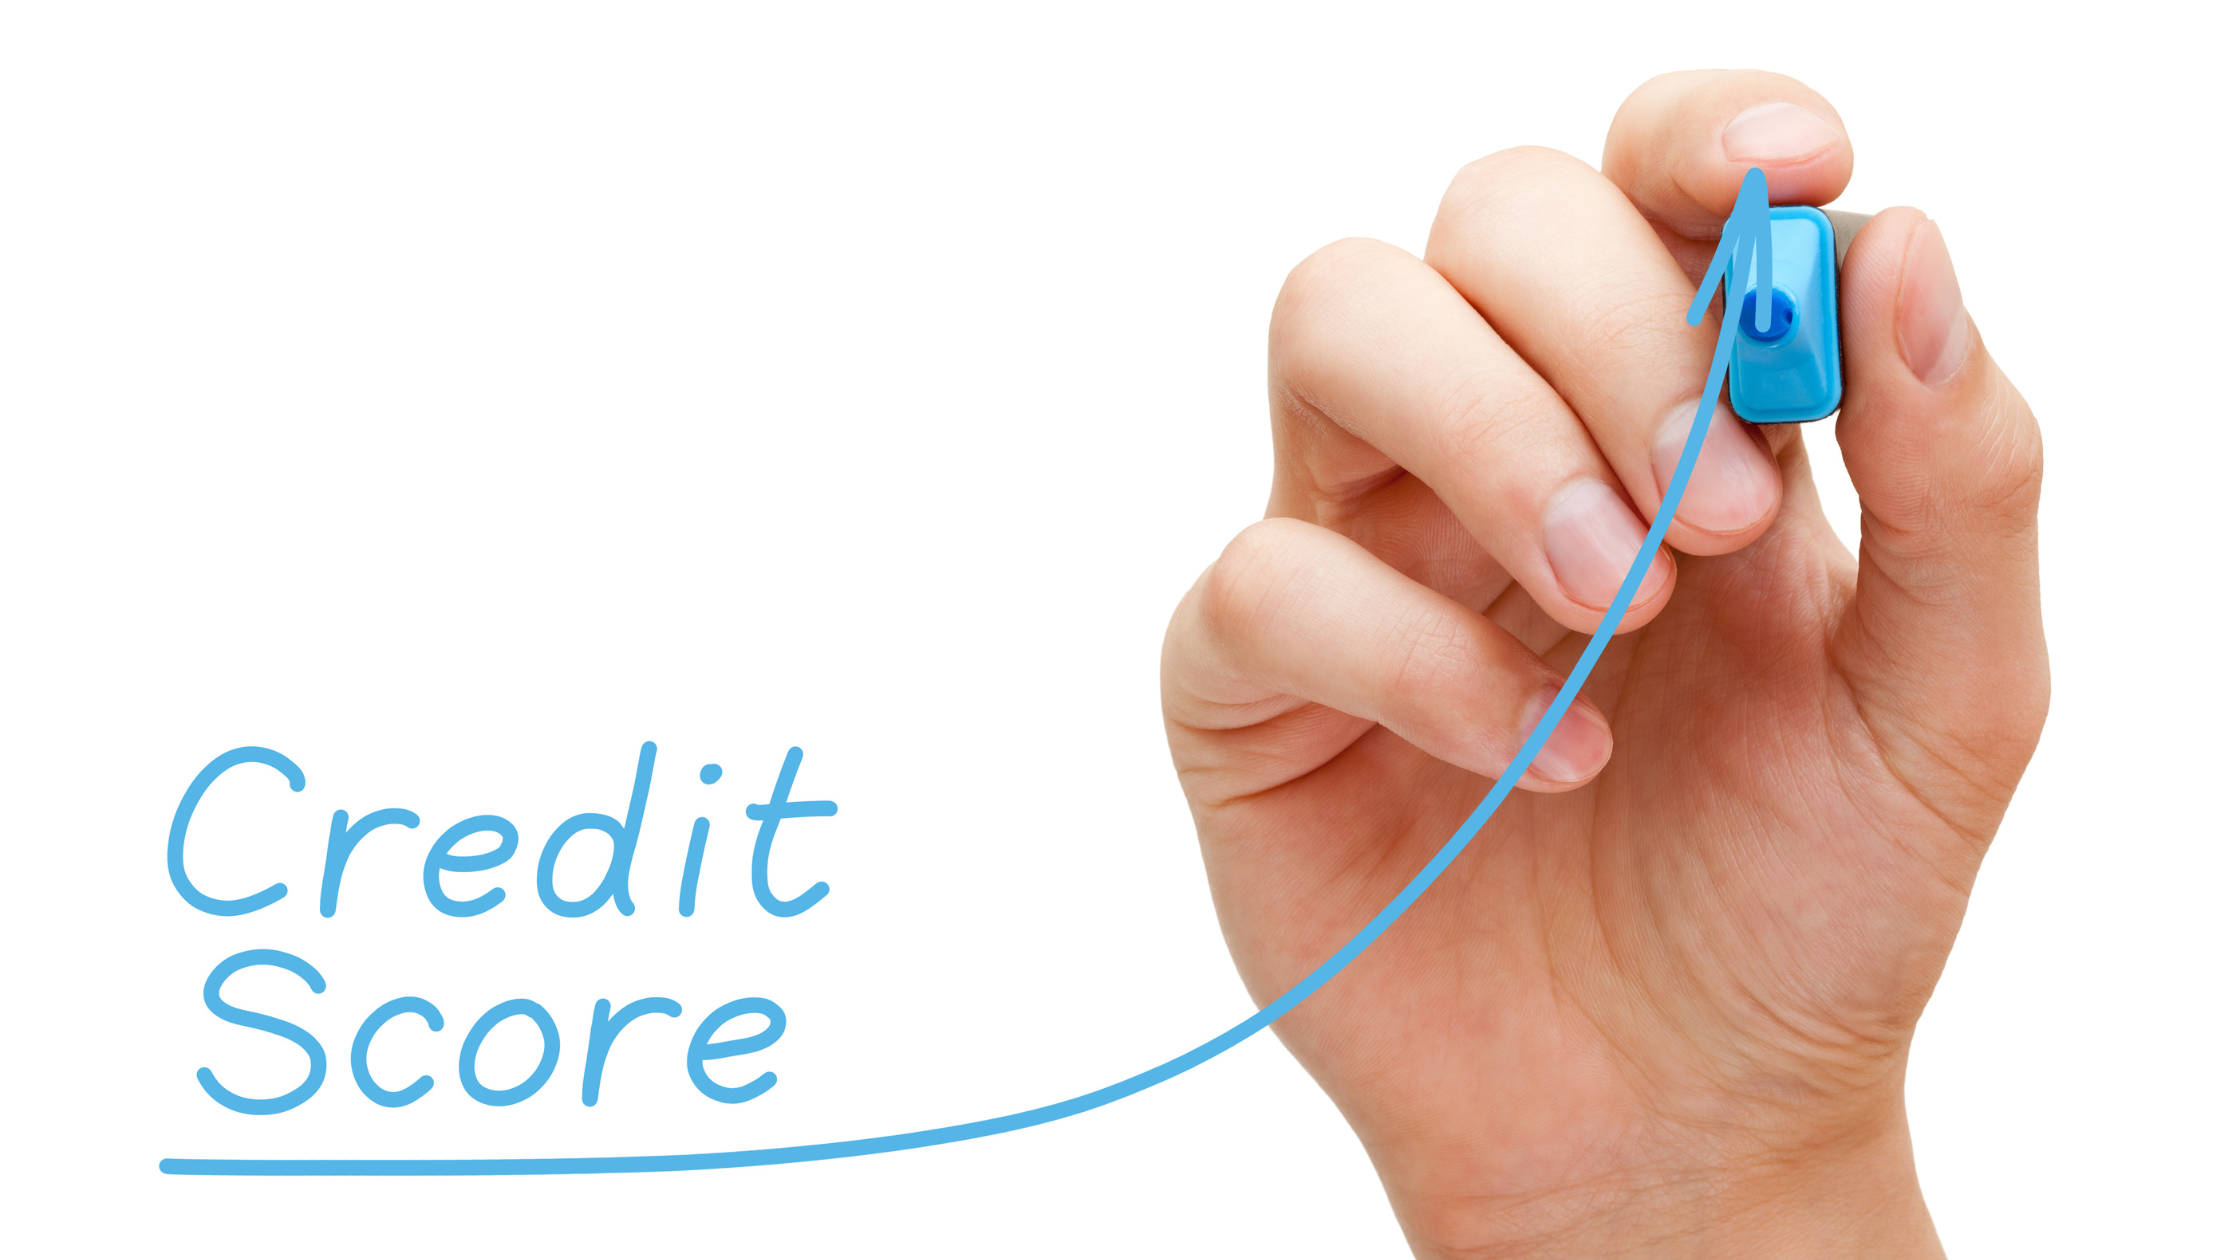 7 Essential Tips for Physicians to Boost Credit Scores and Secure the Dream Home